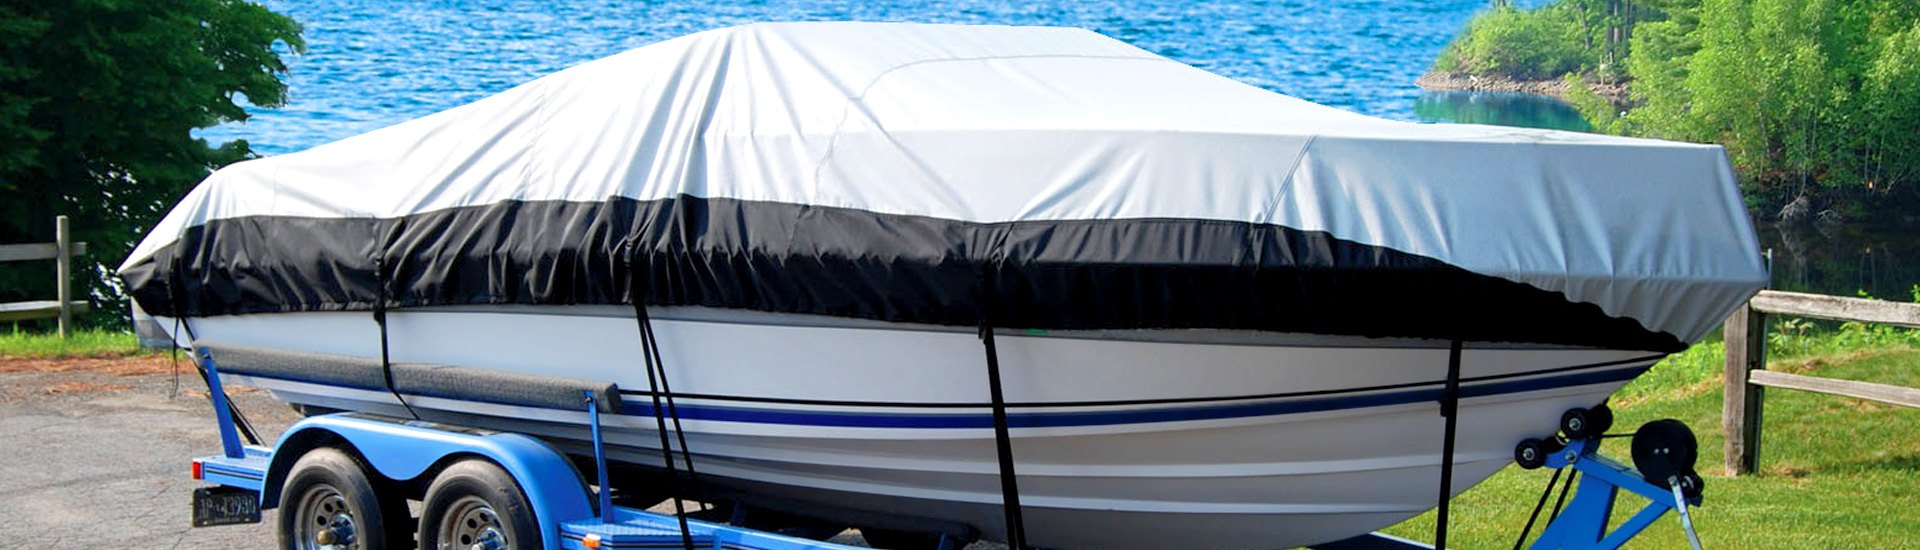 Boat Covers Protect Your Vessel All Year Long